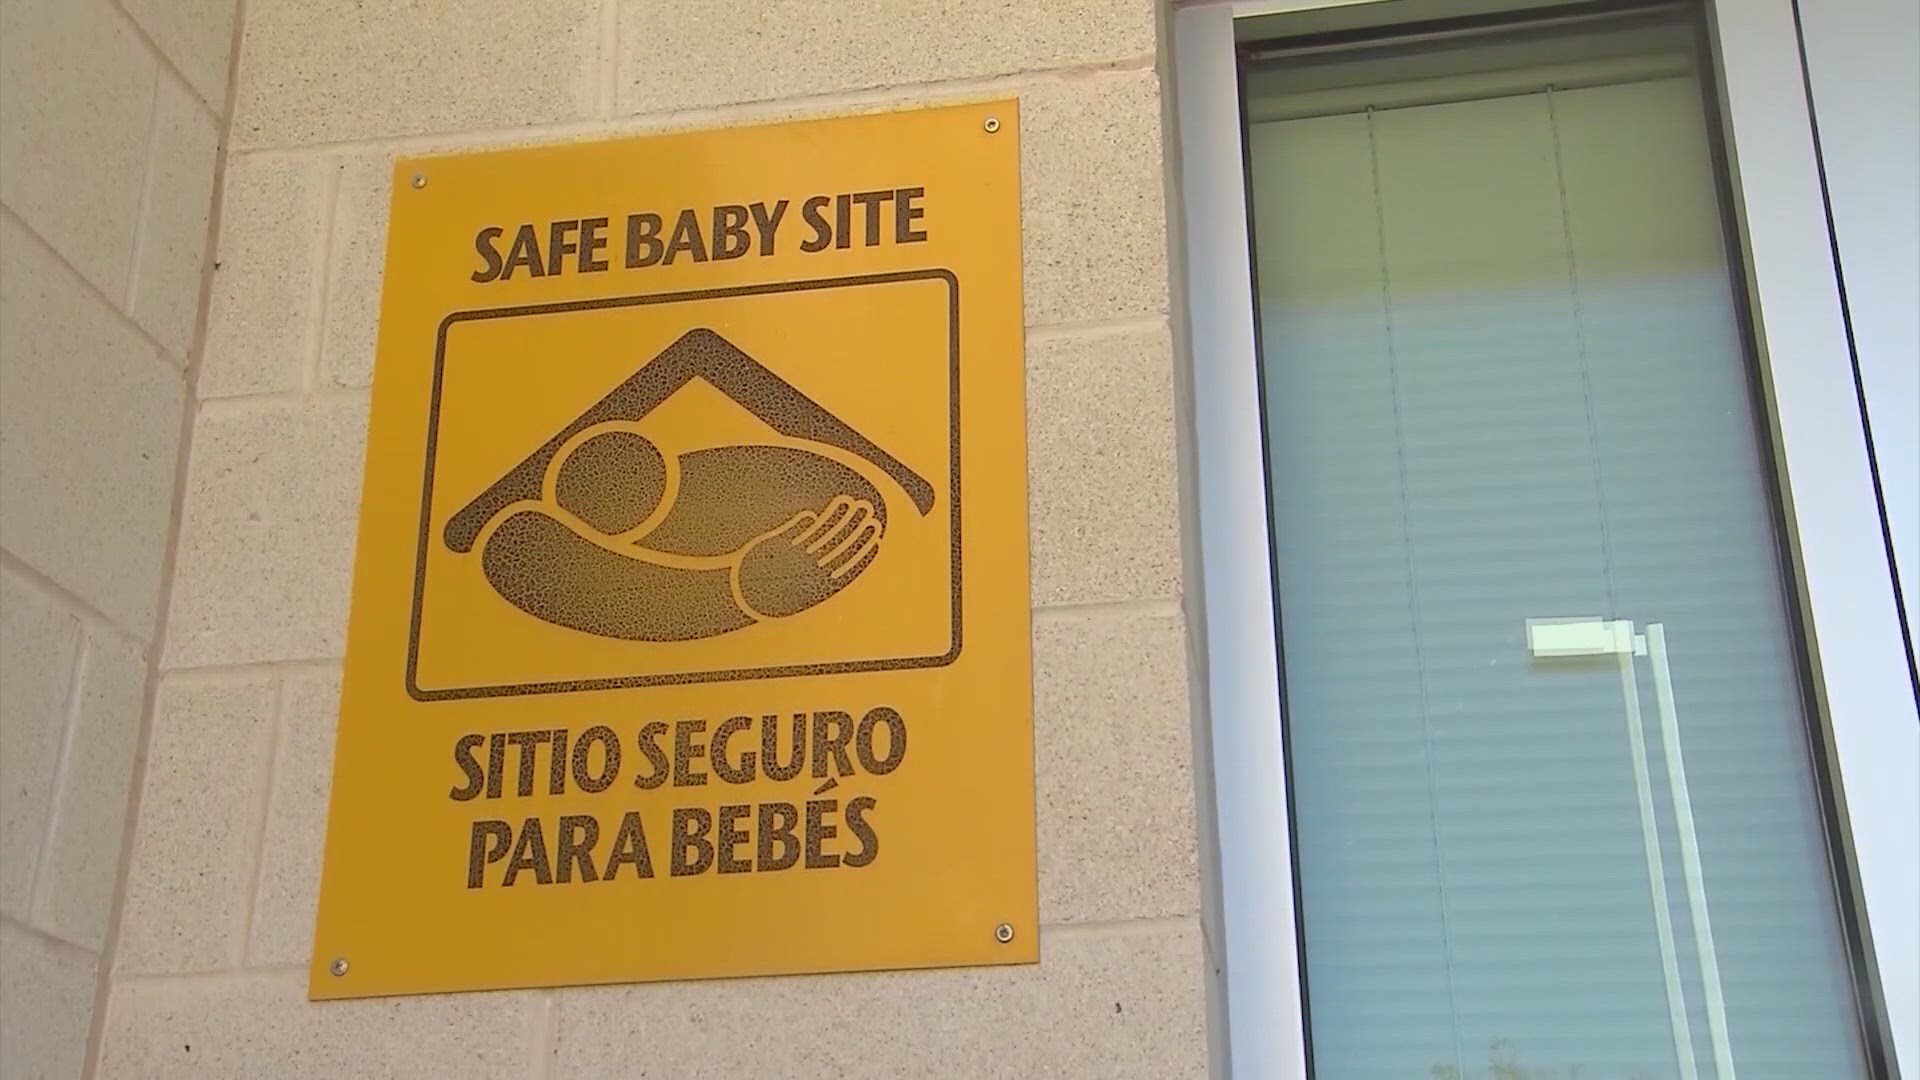 The boxes will be designed to allow parents in crisis to surrender their newborn babies safely.